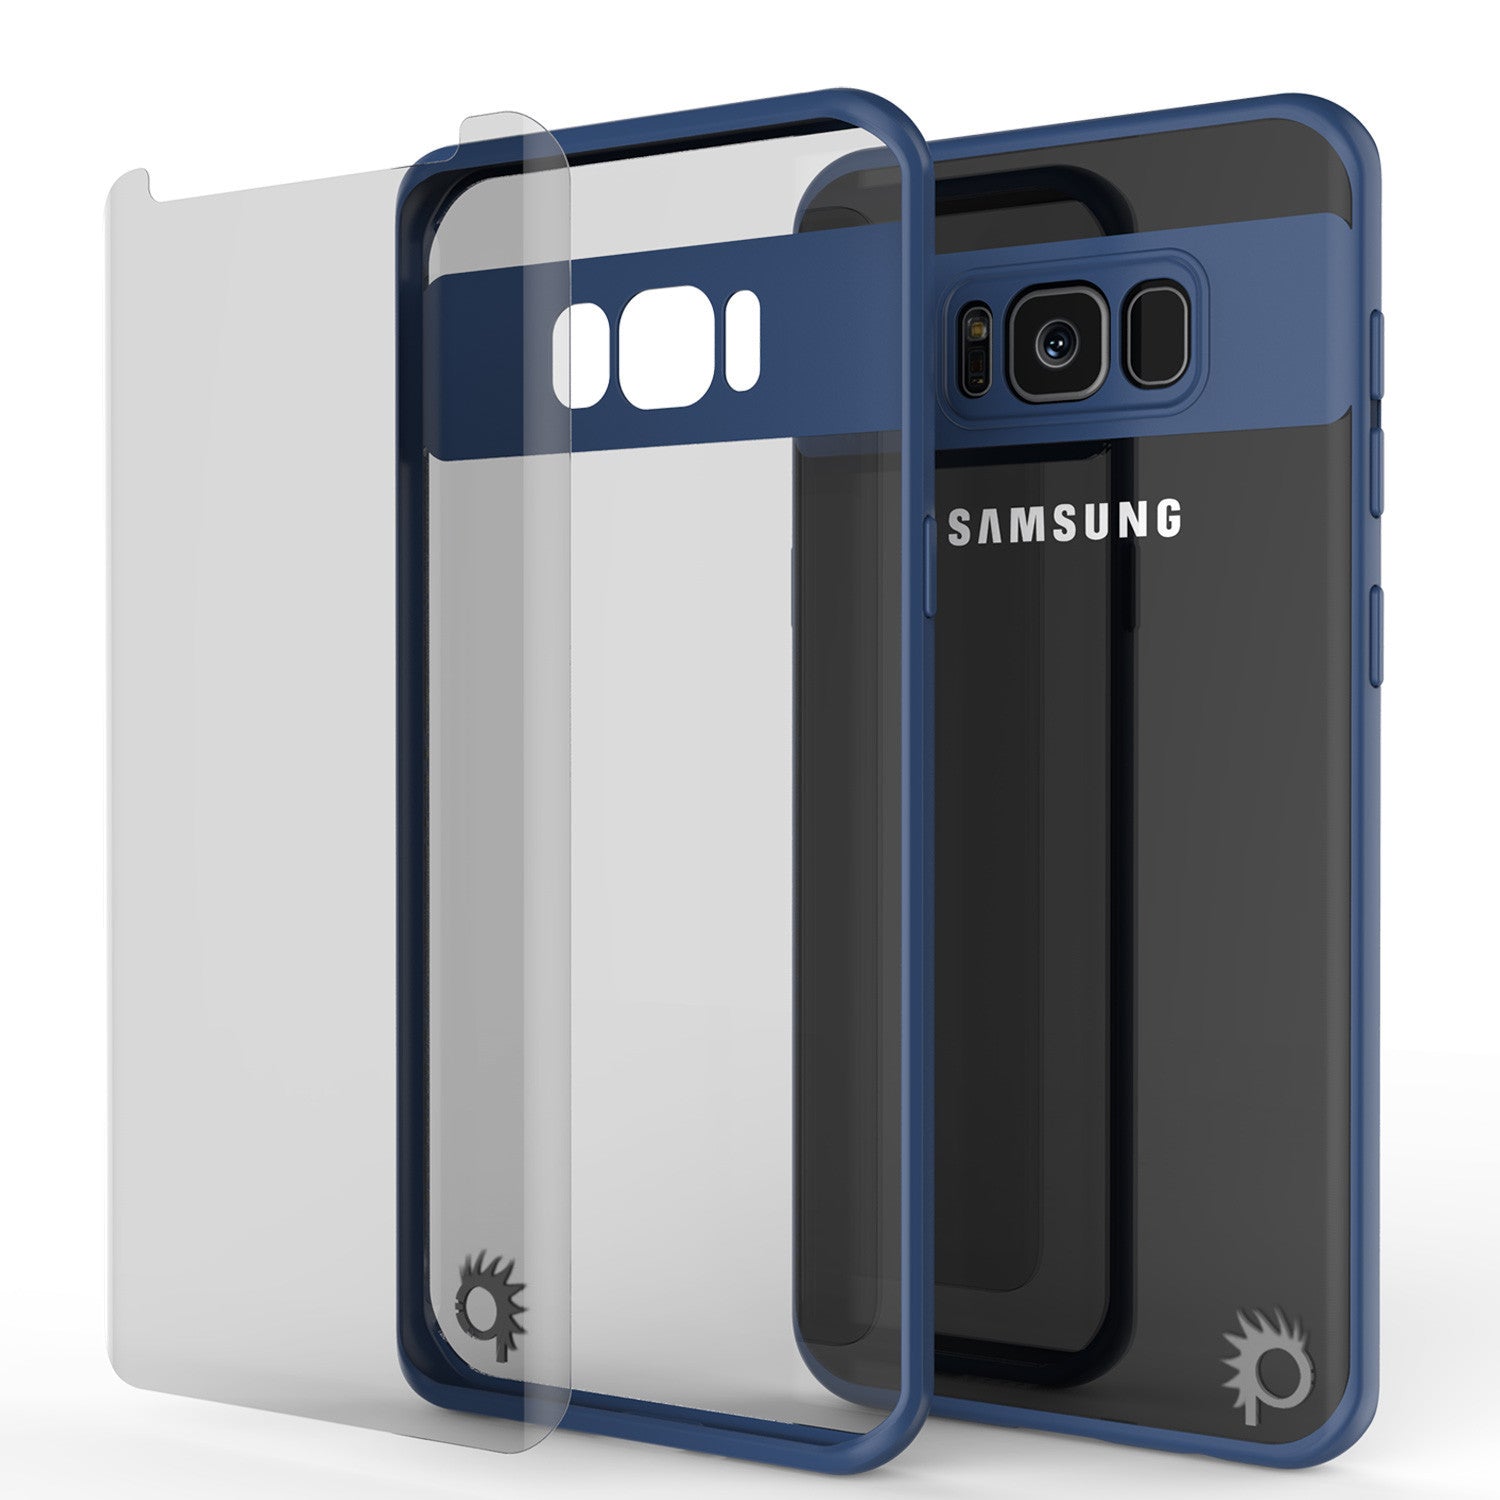 Galaxy S8 Plus Case, Punkcase [MASK Series] [NAVY] Full Body Hybrid Dual Layer TPU Cover W/ Protective PUNKSHIELD Screen Protector